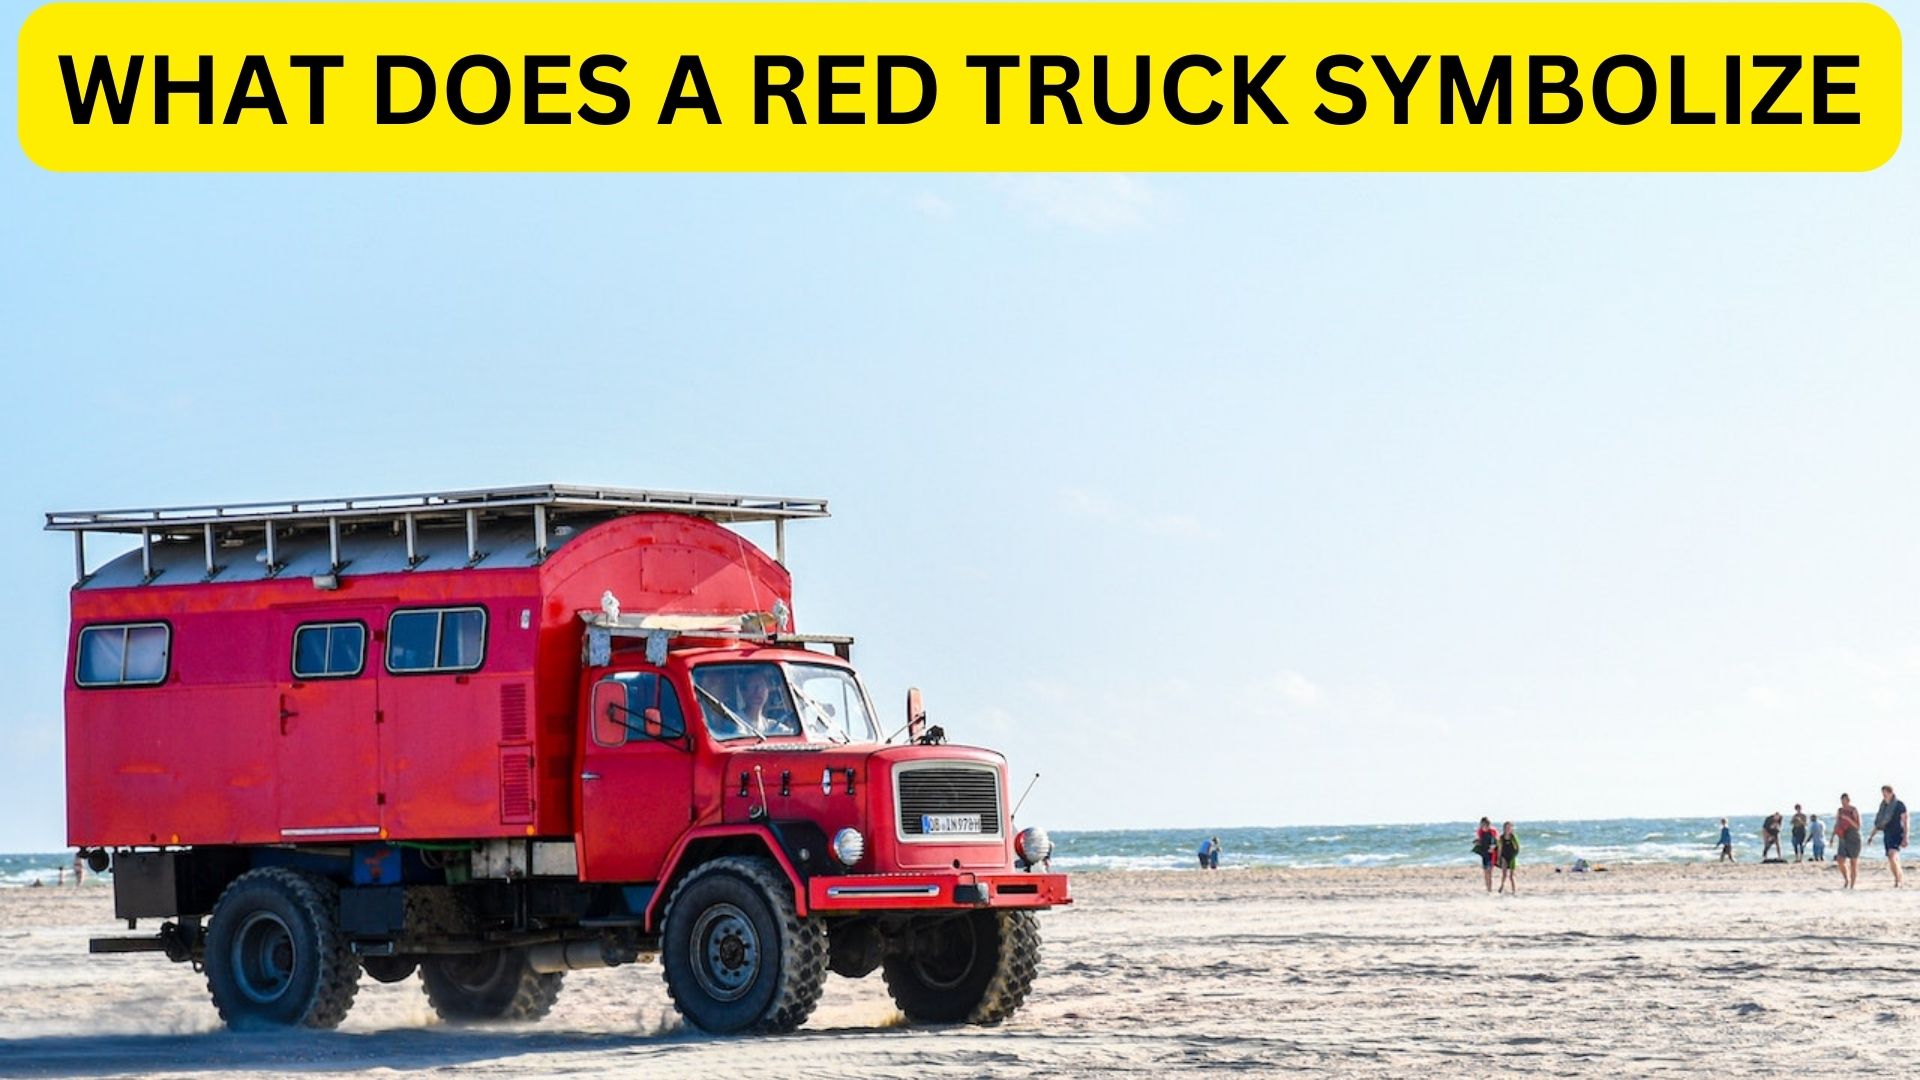 What Does A Red Truck Symbolize? Represents Passion, Emotion, Anger, Lust, Sin, Enthusiasm Or Zeal